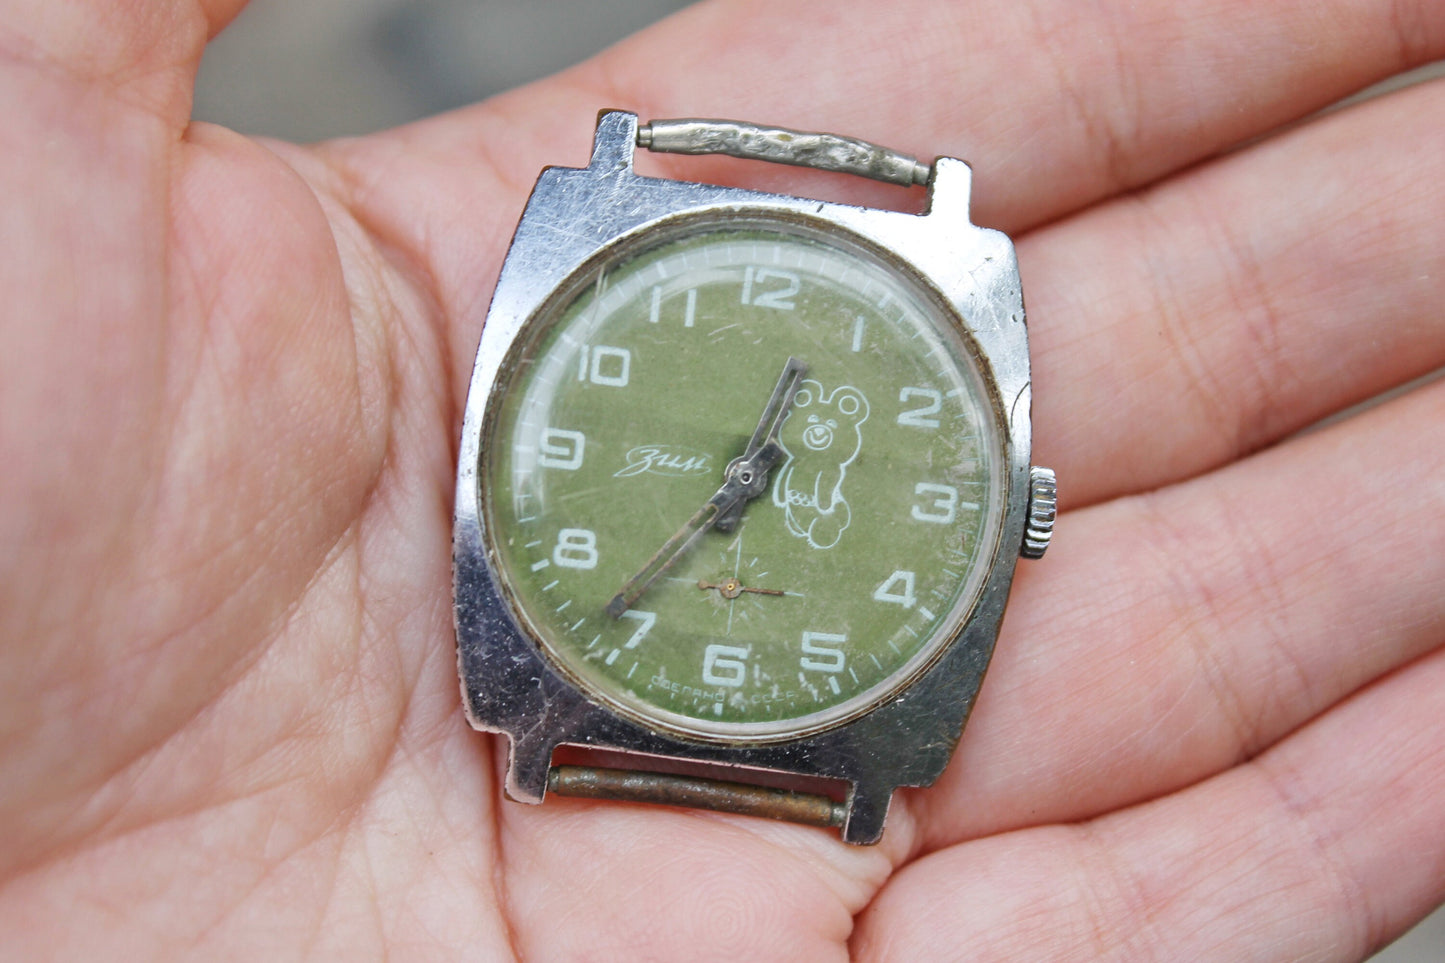 Vintage ussr ZIM watches - Olympic bear - Stainless Steel Vintage Watch from Soviet Union - NOT WORKING - without band